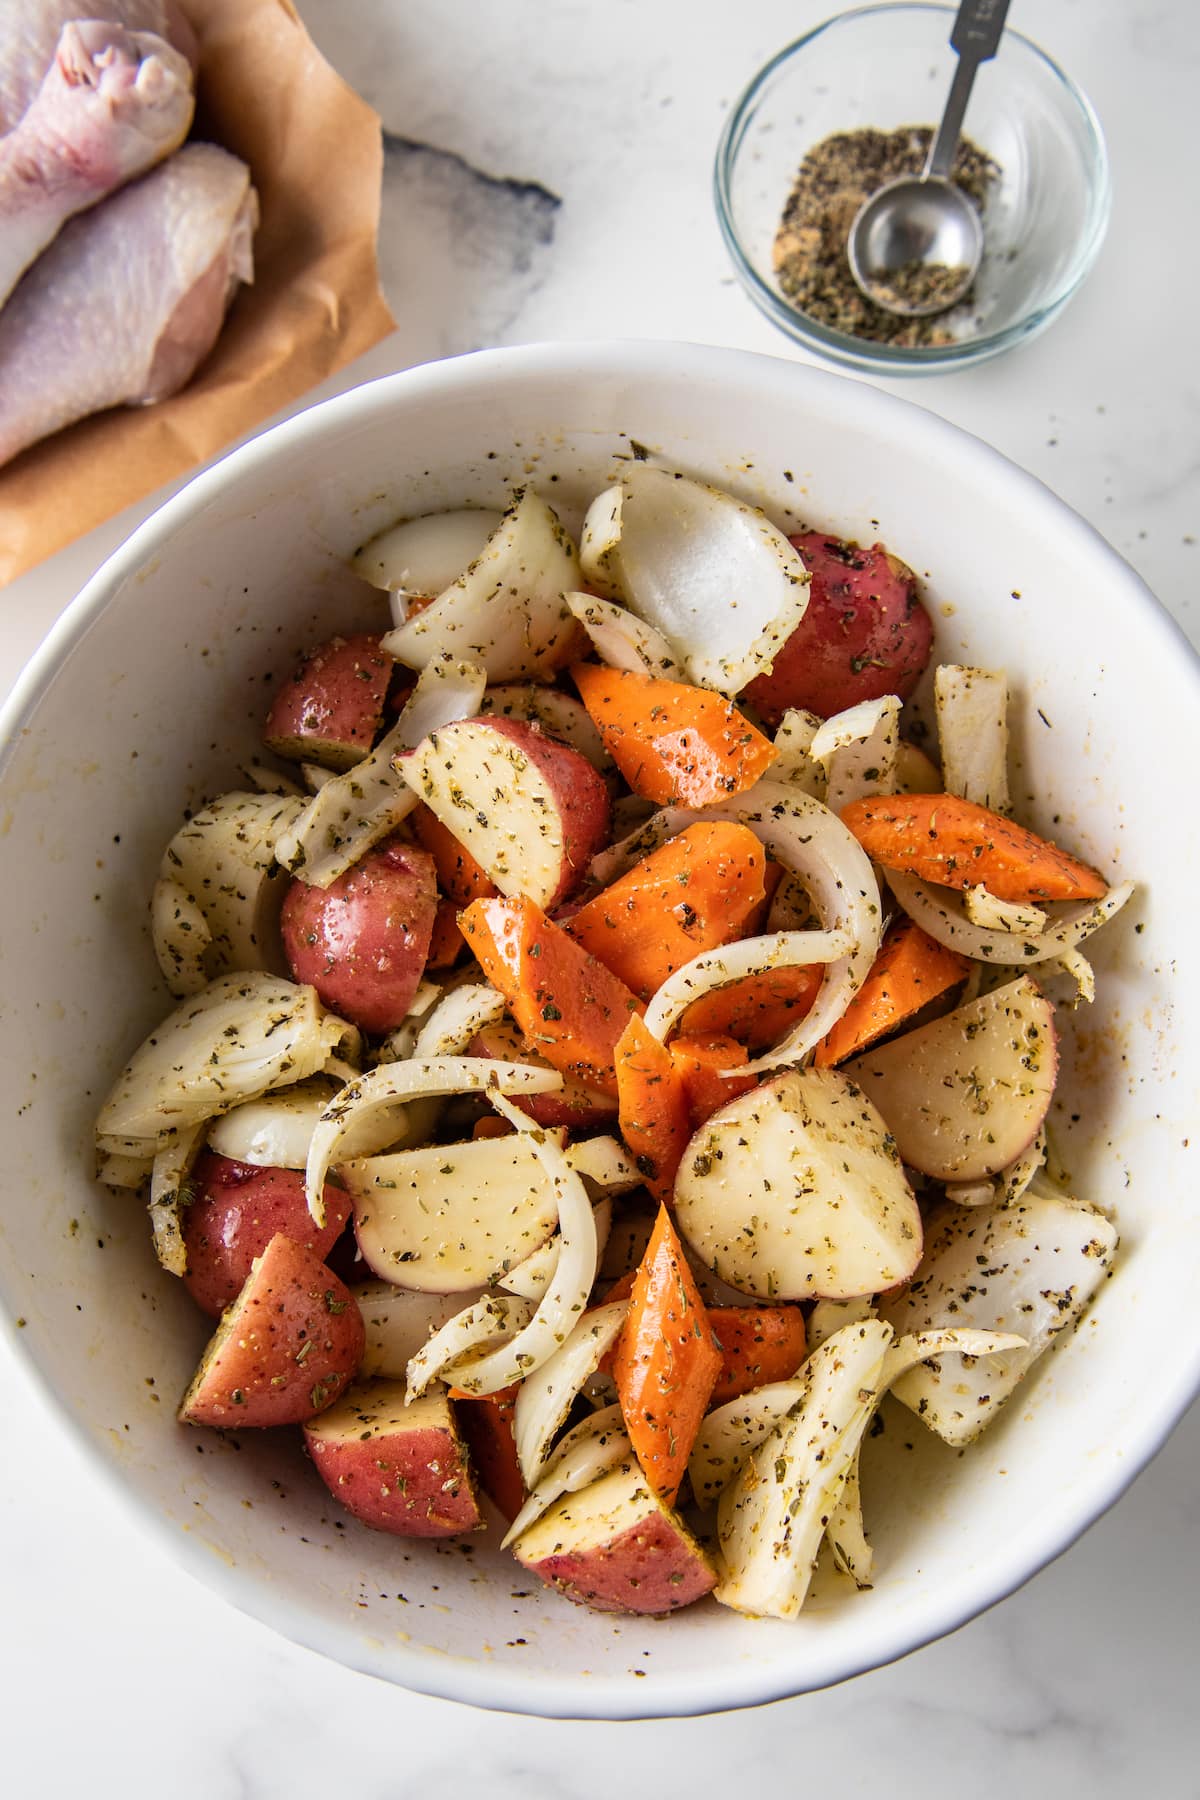 a bowl with large cuts of assorted vegetbles like carrots, onions, and potatoes